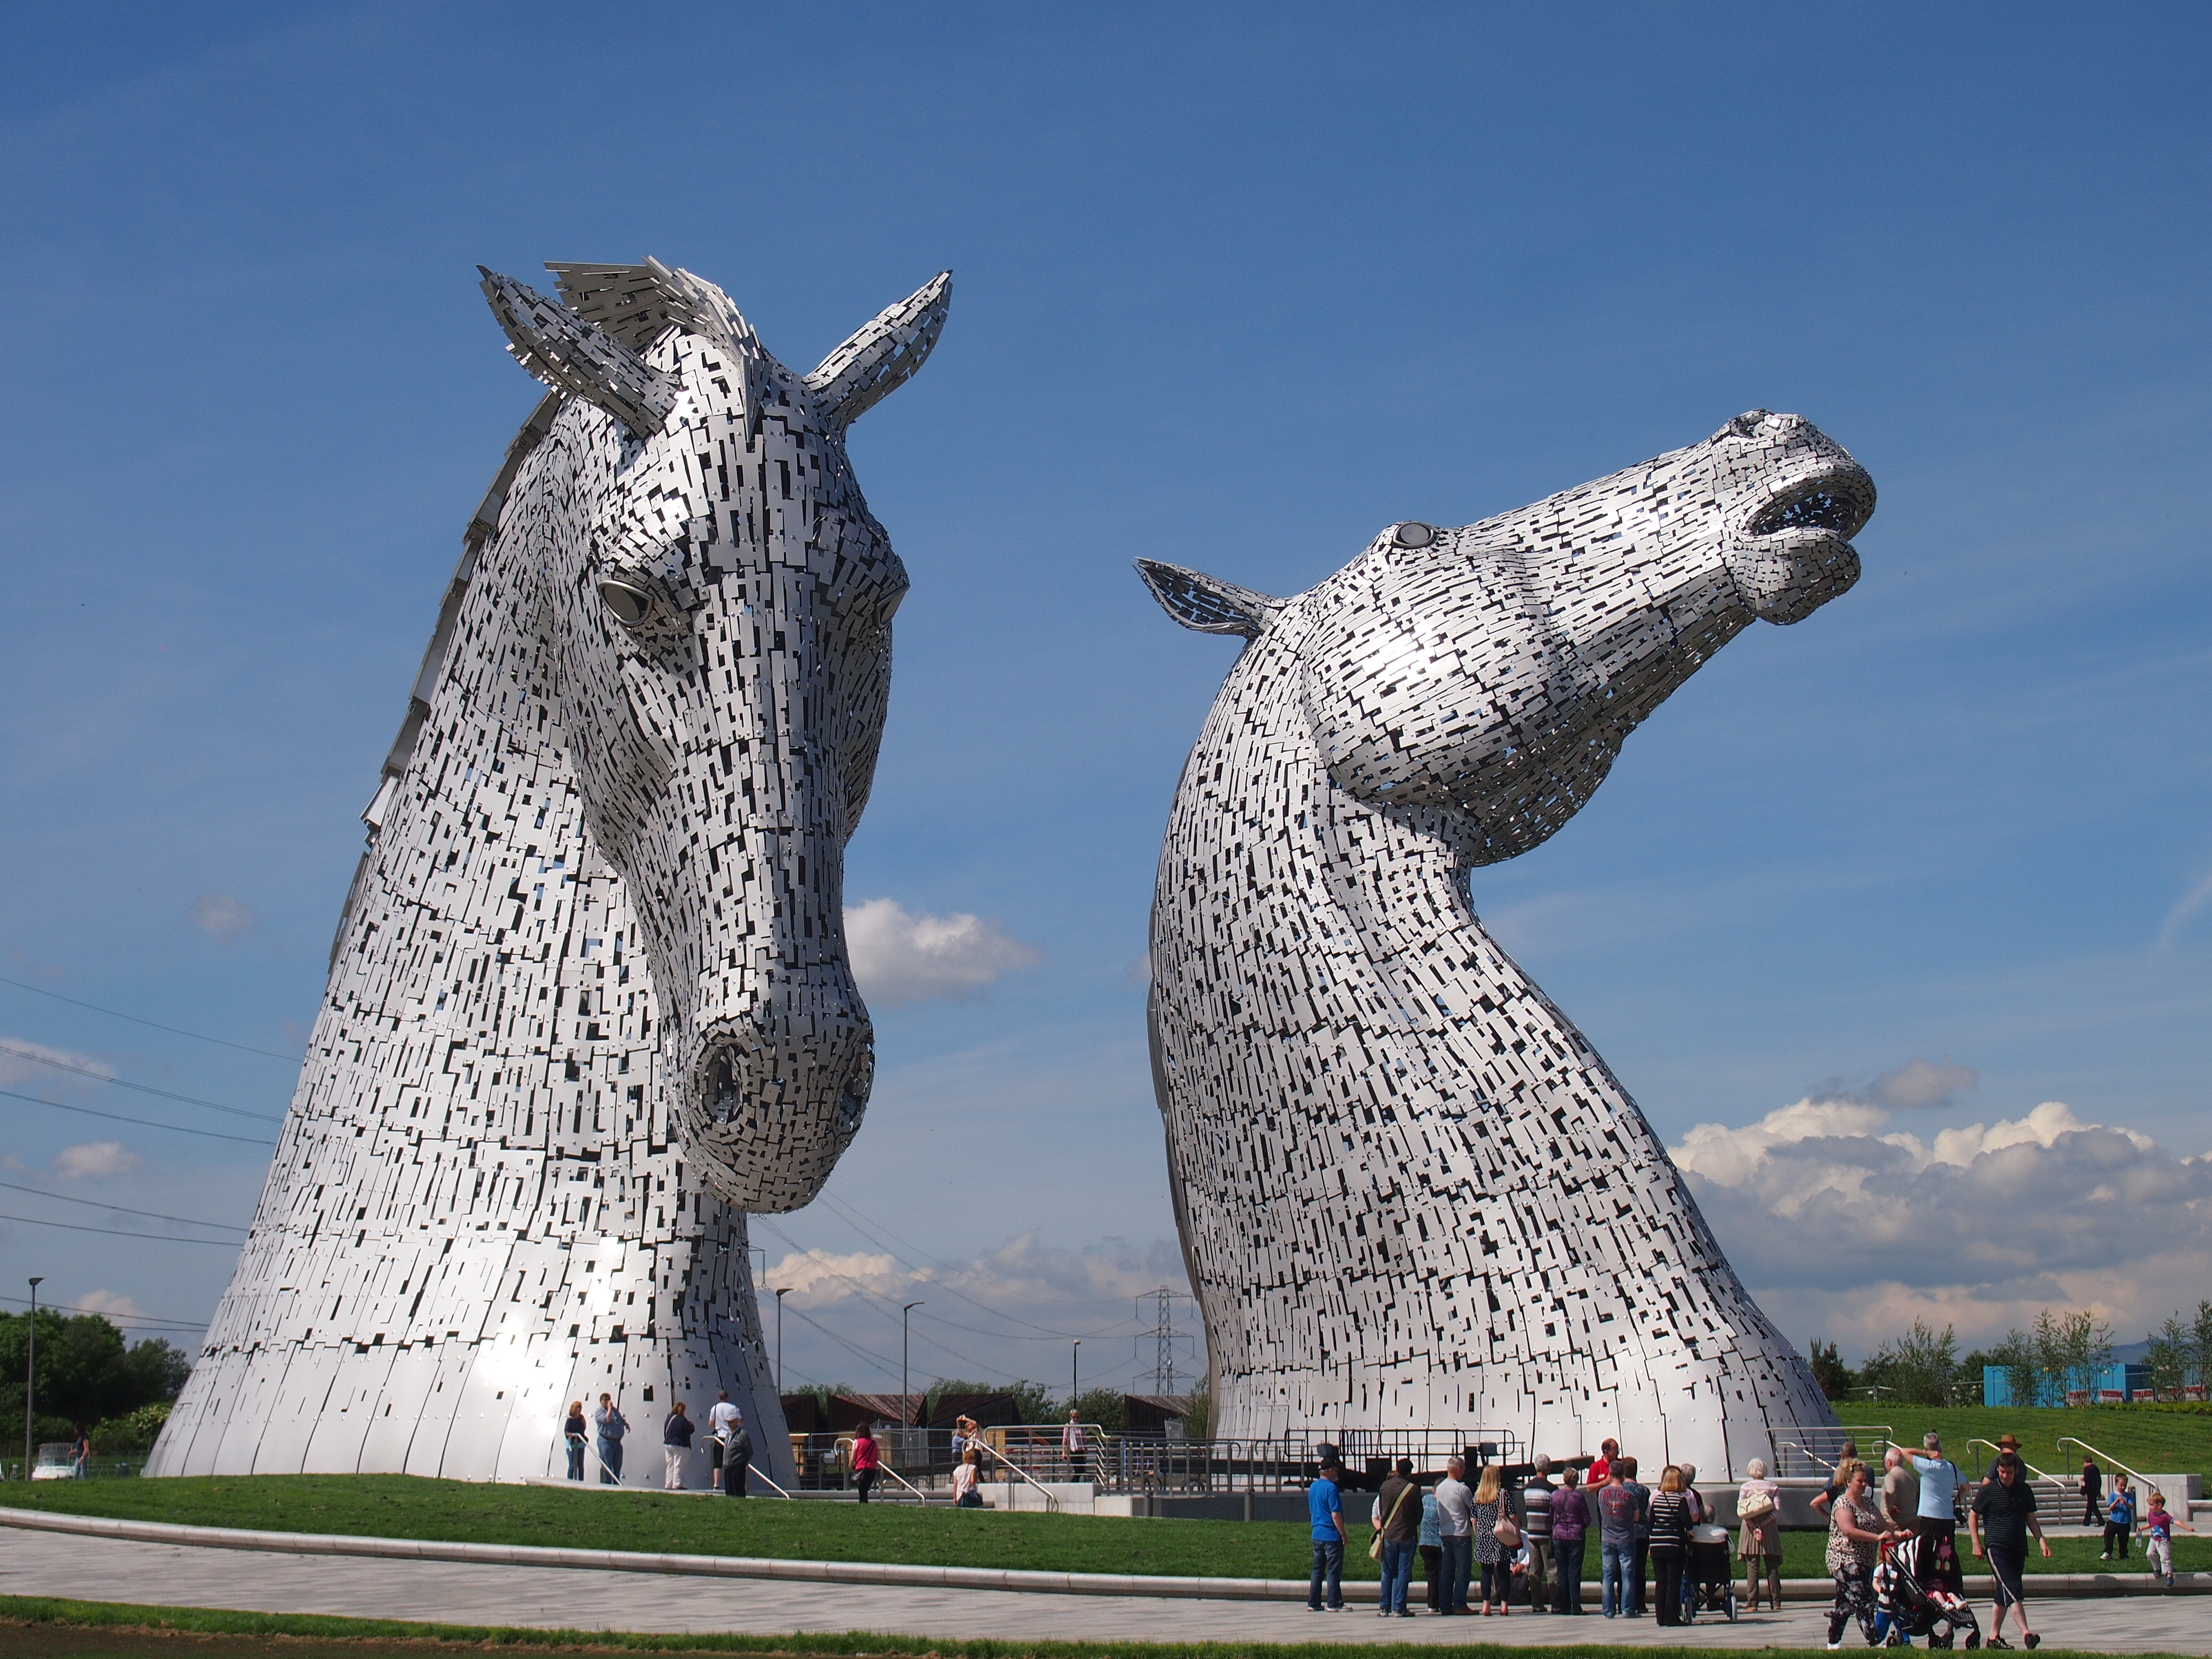 File:The Kelpies, at The Helix, Scotland.JPG - Wikimedia Commons